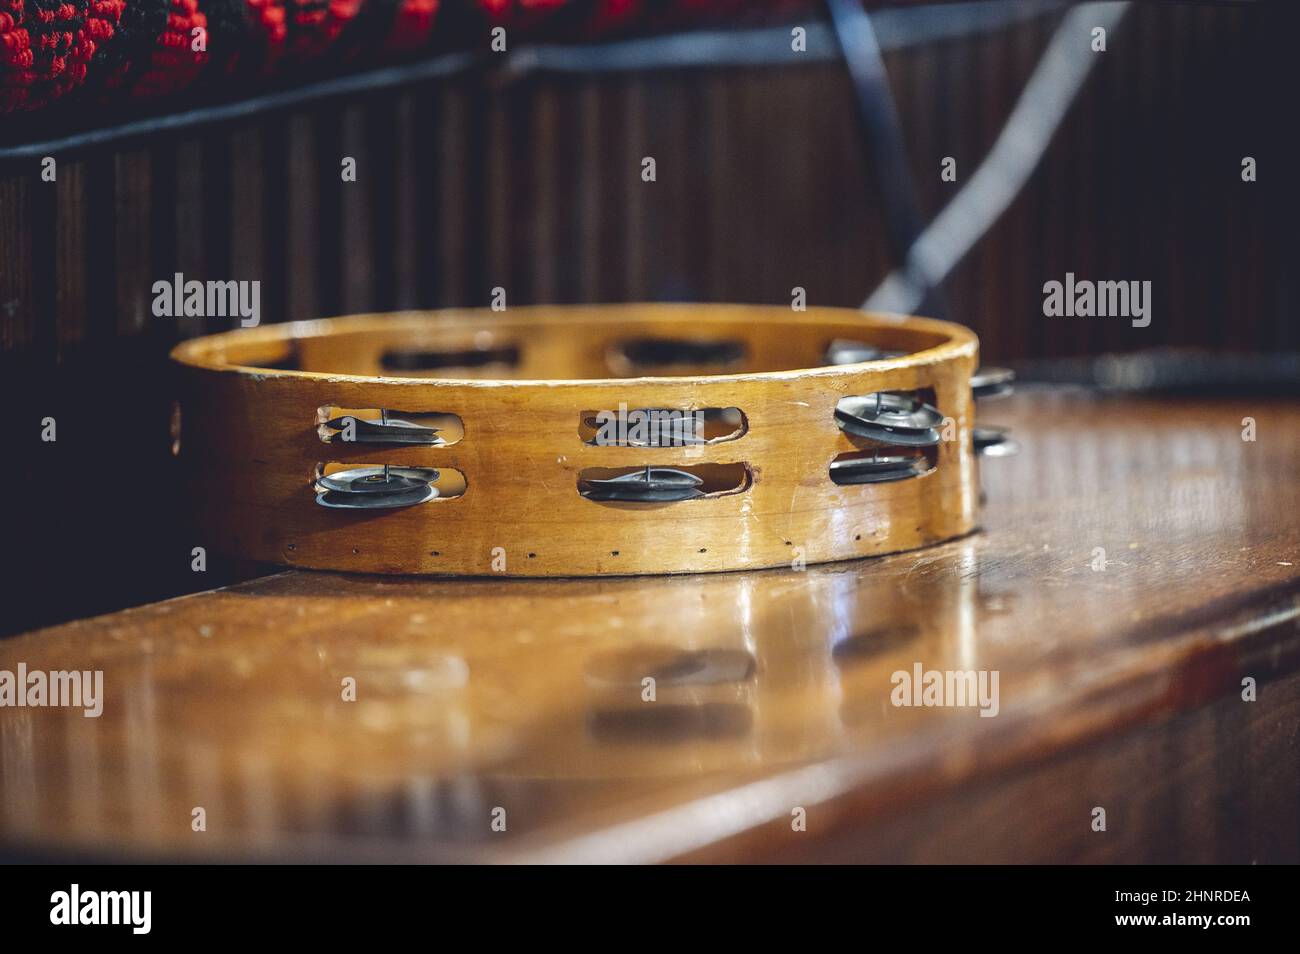 Closeup of a Tambourine instrument on a wooden table Stock Photo